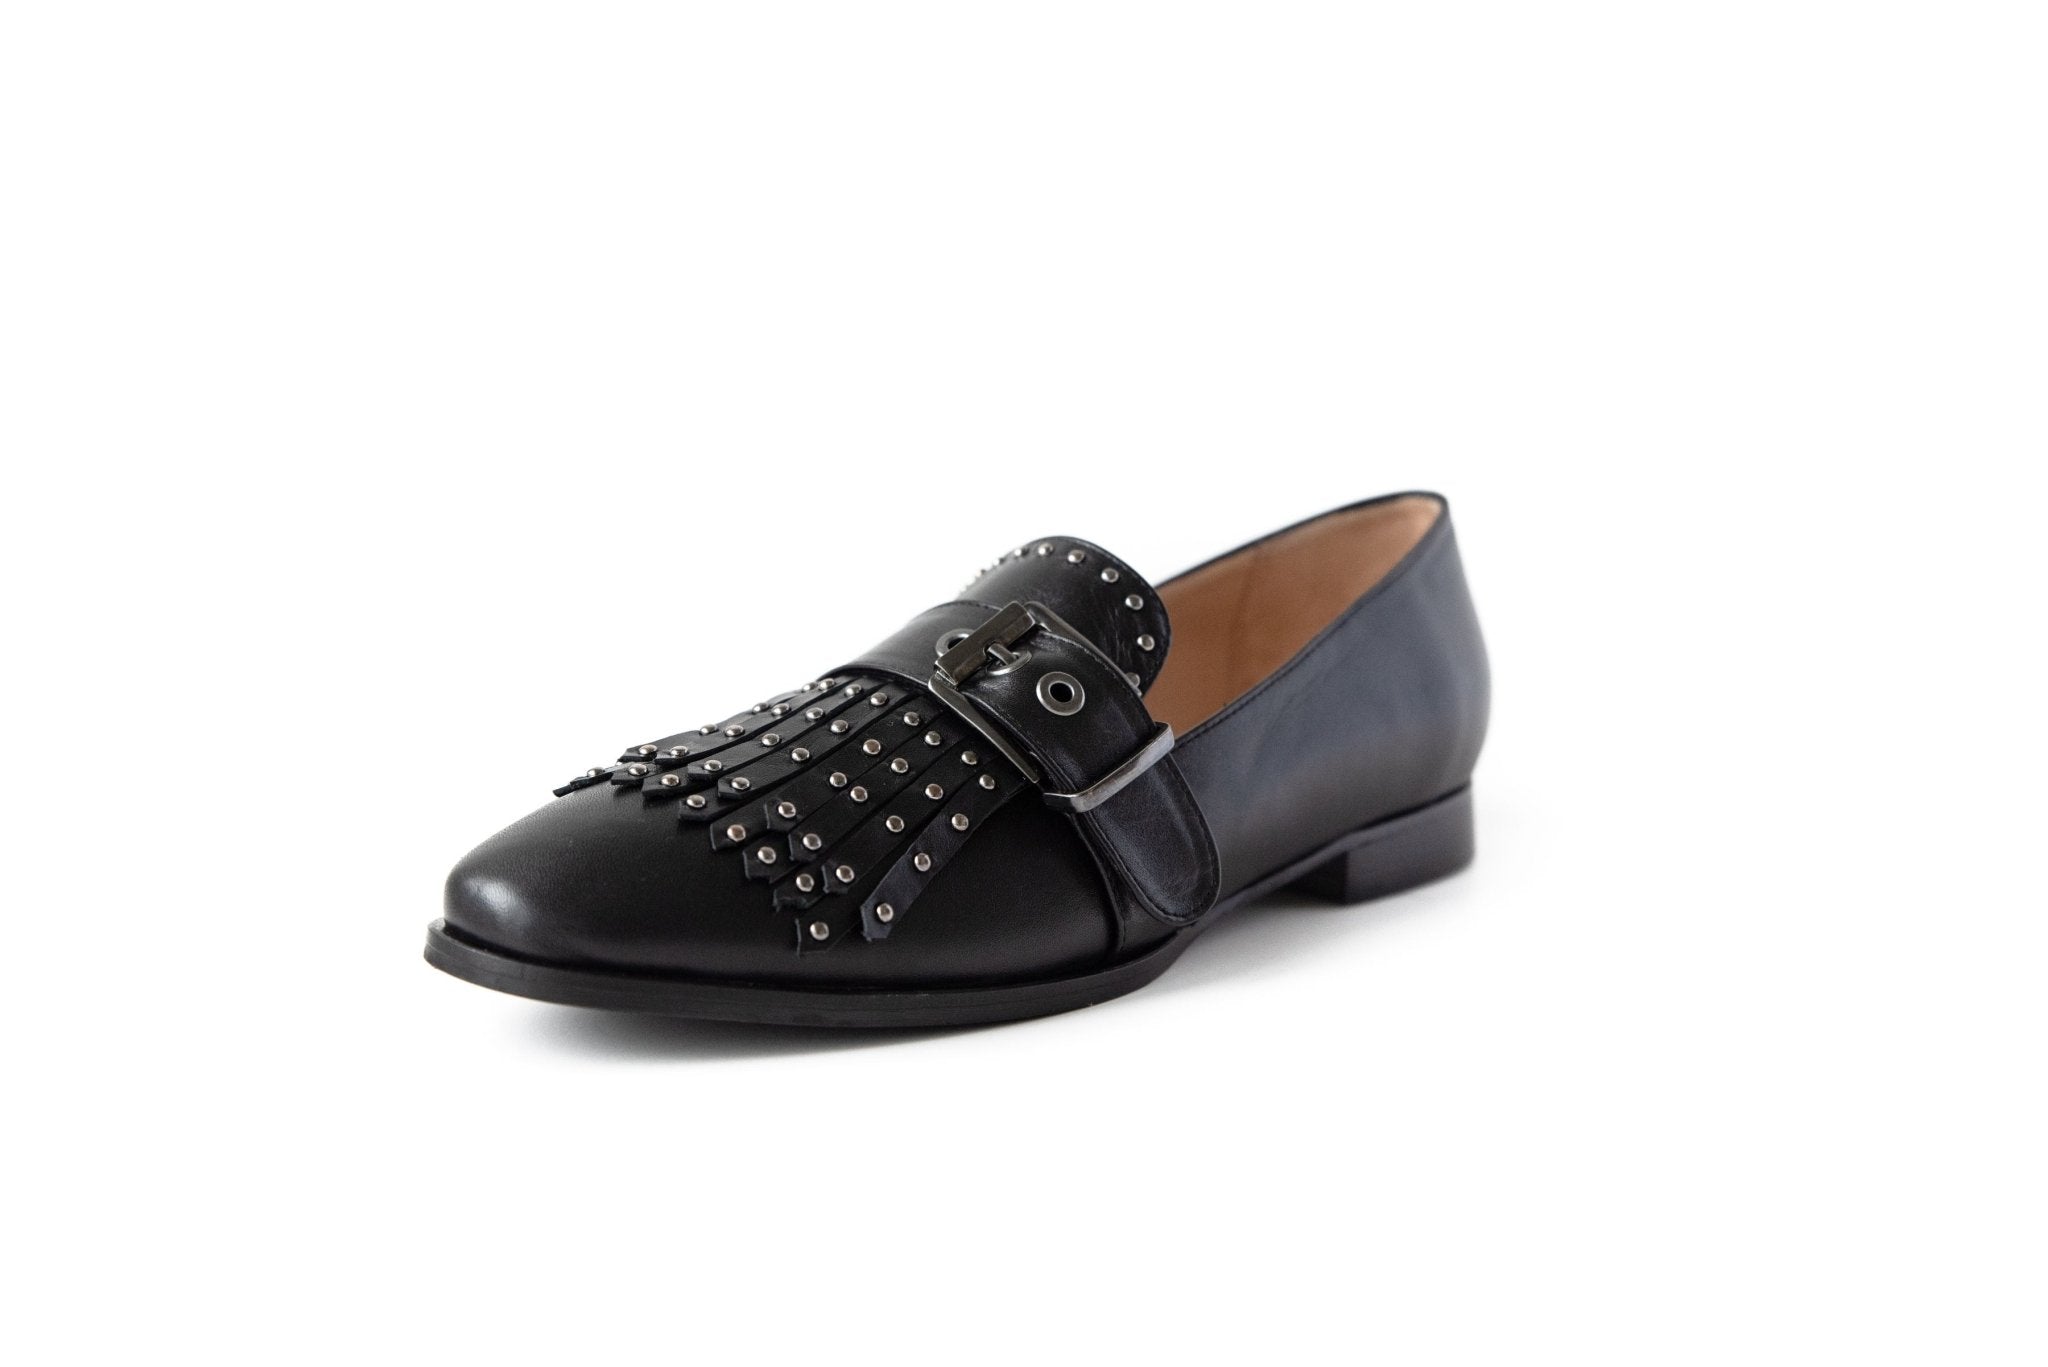 Stud Loafer Black Flats by Sole Shoes NZ F10-35